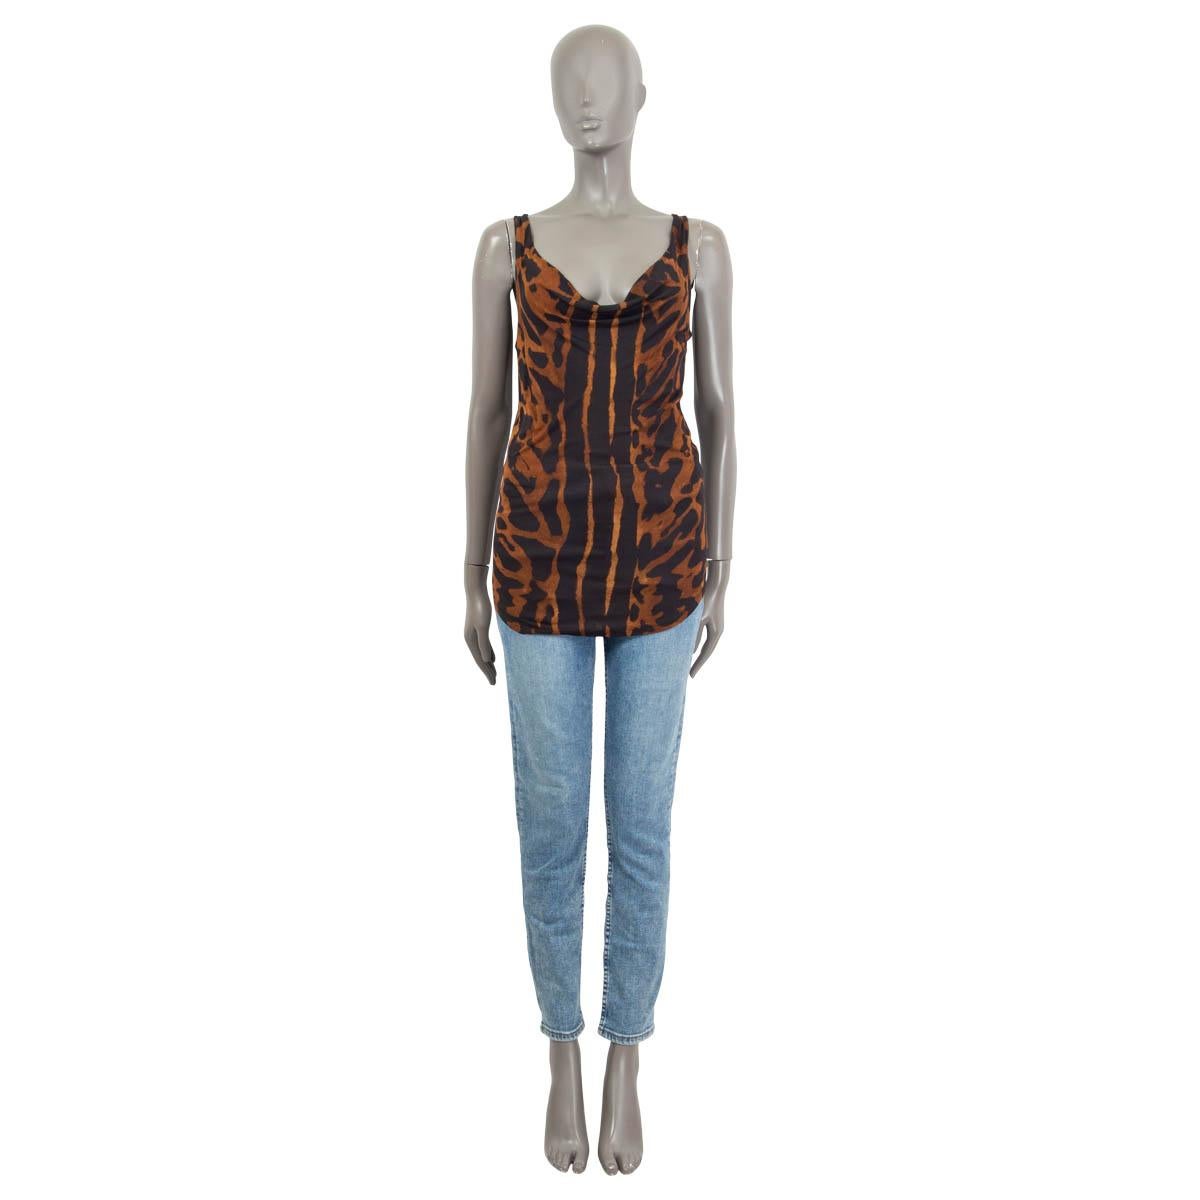 100% authentic Alexander McQueen leopard print tank top in black and cognac viscose (100%). Unlined. Has been worn and is in excellent condition.

Measurements
Tag Size	40
Size	S
Bust	80cm (31.2in) to 102cm (39.8in)
Waist	72cm (28.1in) to 90cm